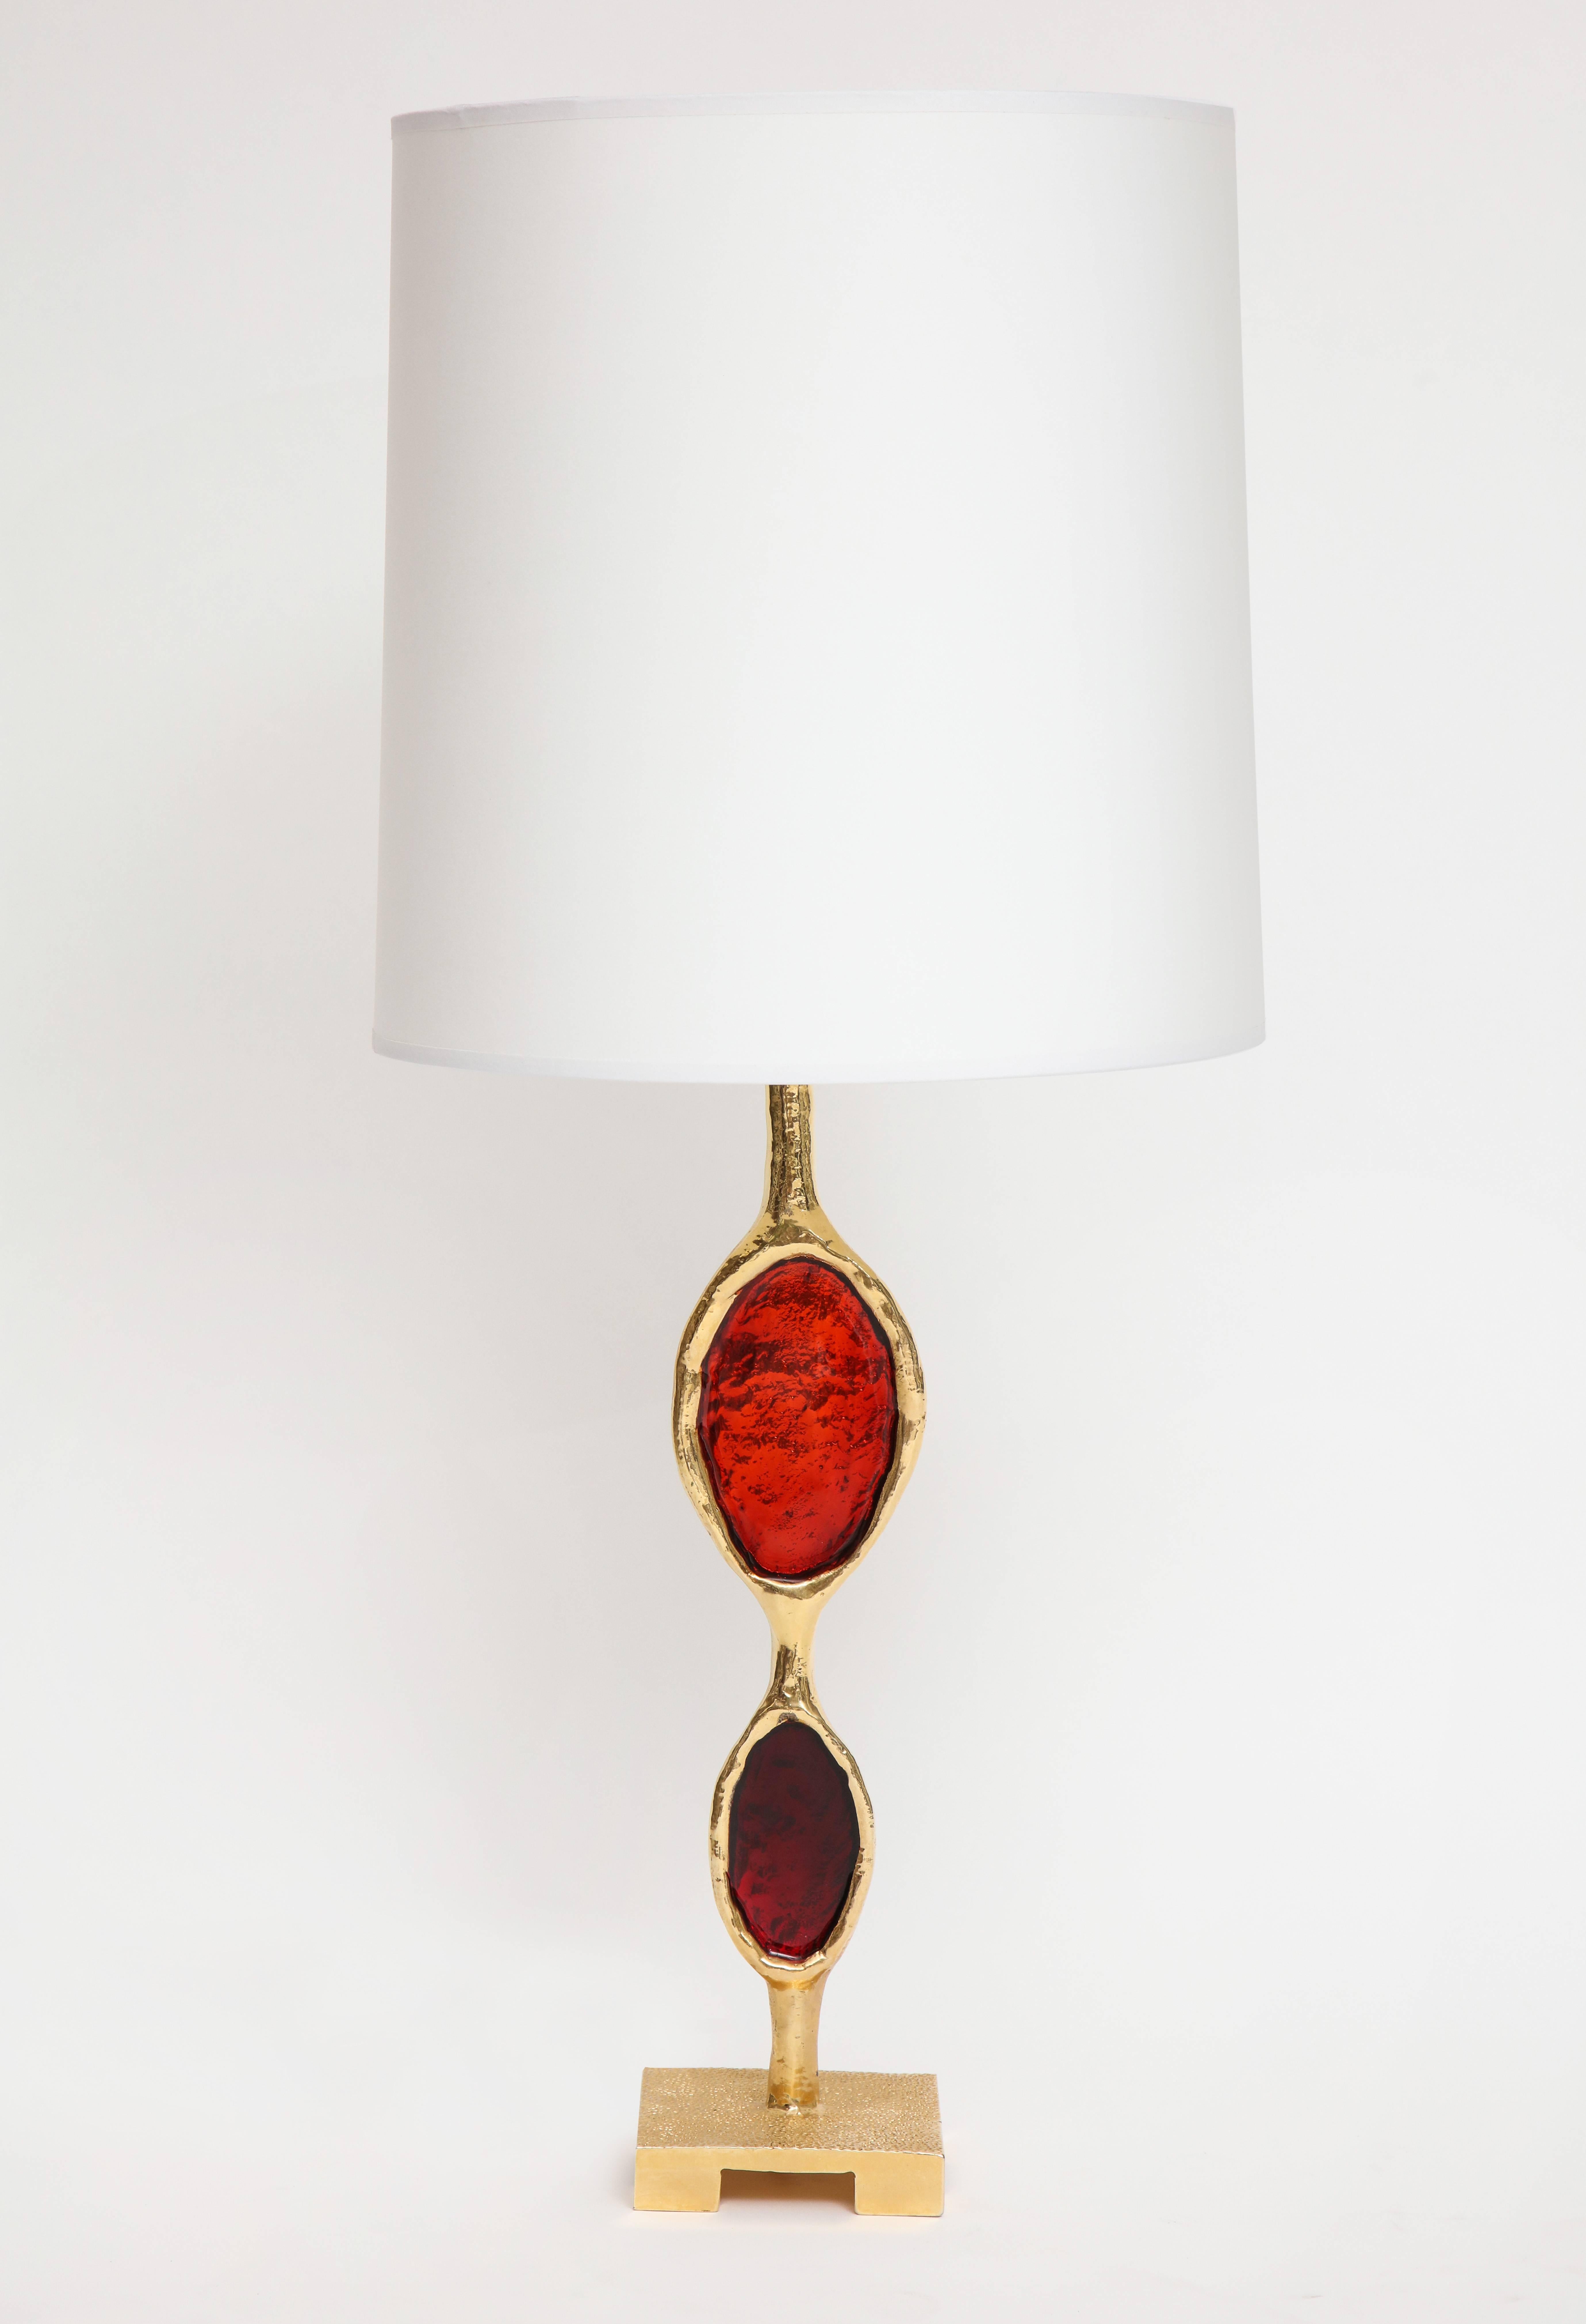 Fondica bronze table lamp with enameled red jewel sections, 1980s, France

Heavy and lovely red table lamp. Made by Fondica France. Enameled jewel red sections and bronze and gold base. Shown with paper shade.